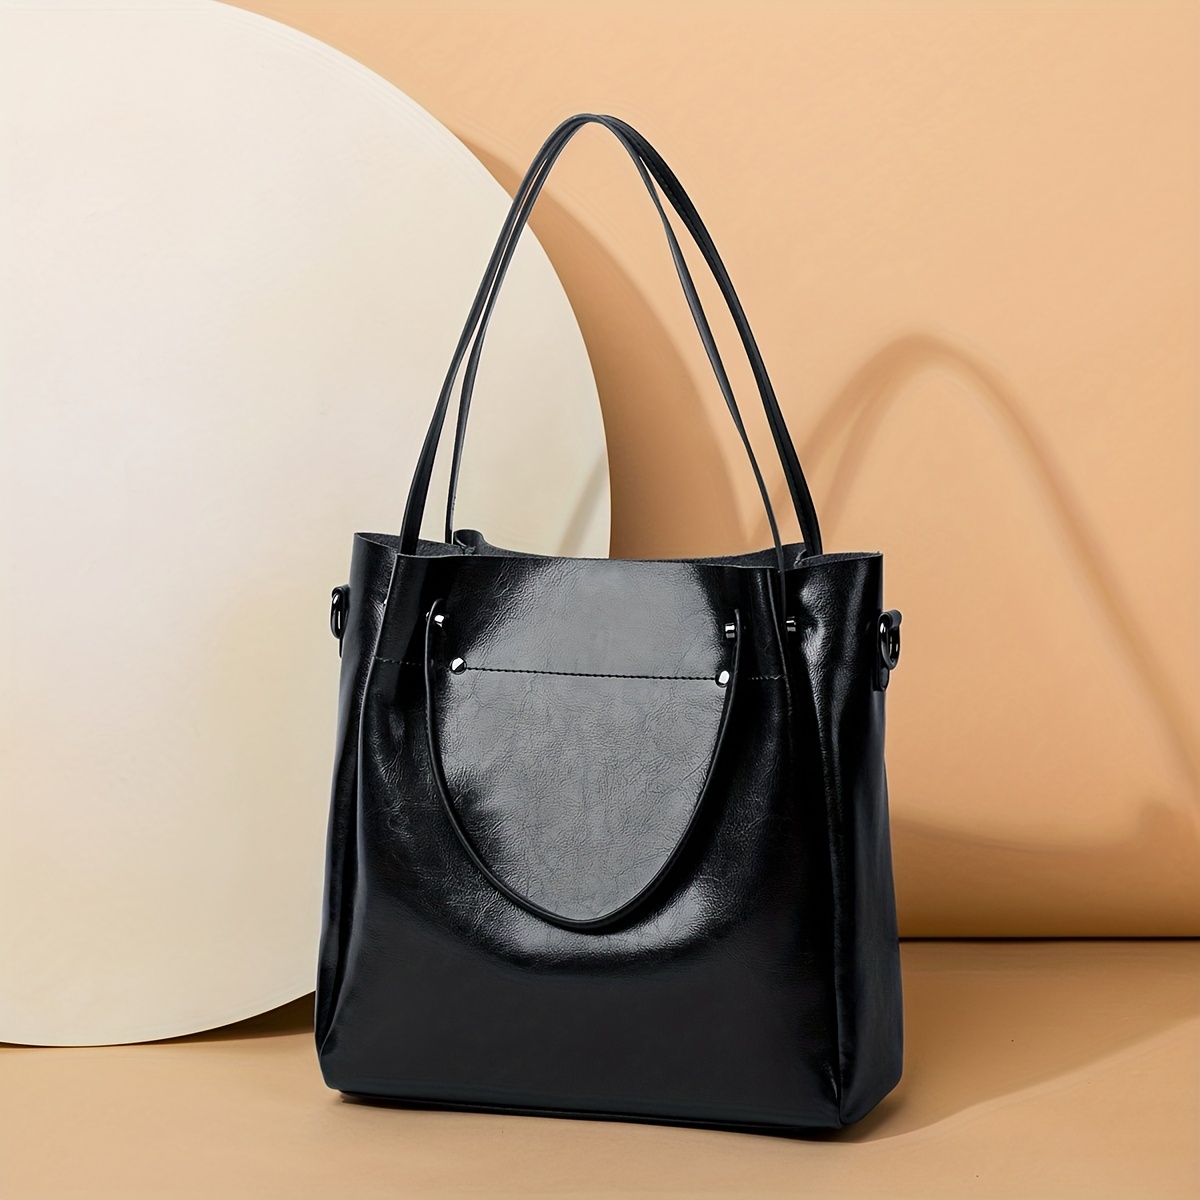 1pc Black Large Capacity Soft Tote With High-end Feeling Can Be Used As  Handbag, Shoulder Bag Or Crossbody Bag, Fashionable And Versatile For Four  Seasons And Commuting